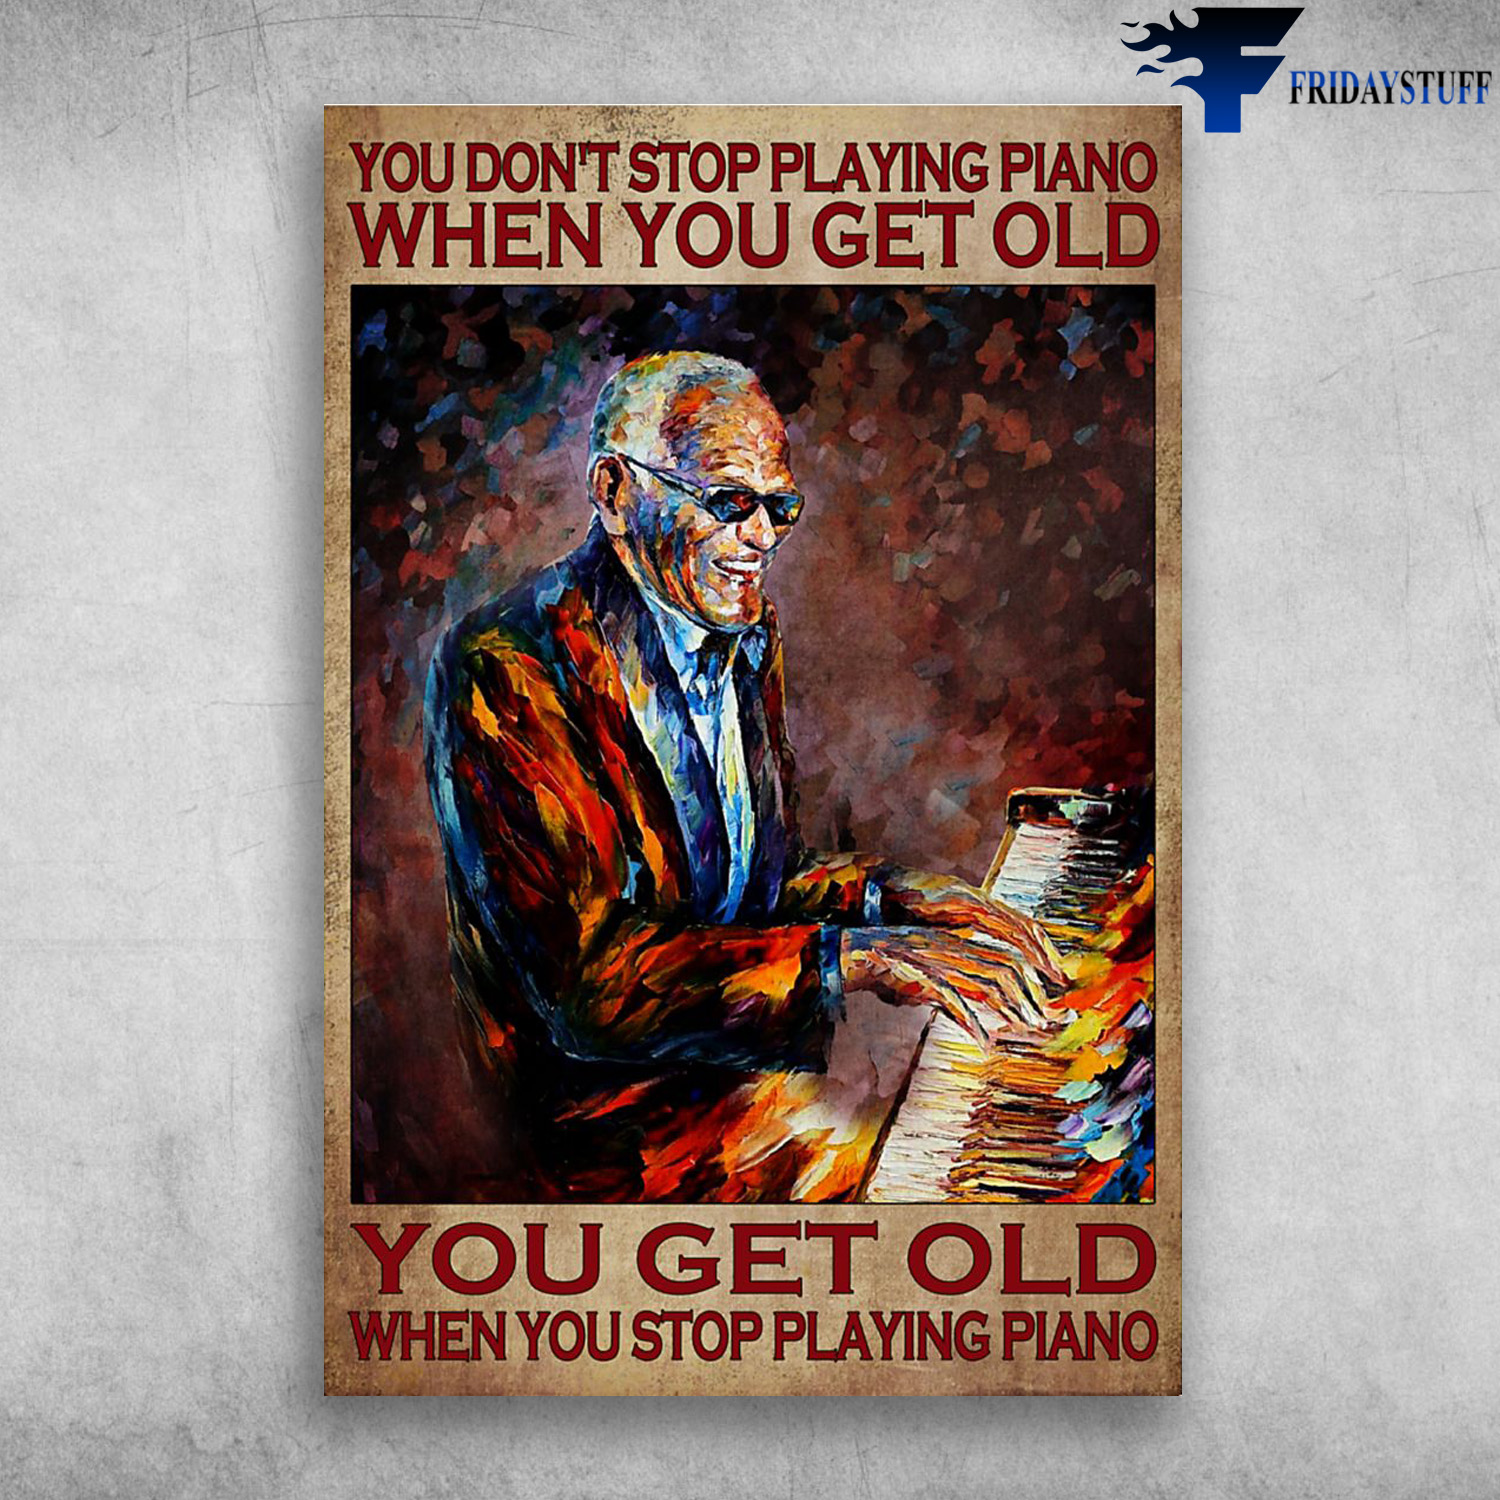 Old Man Plays Piano - You Don't Stop Playing Piano, When You Get Old, You Get Old When You Stop Playing Piano